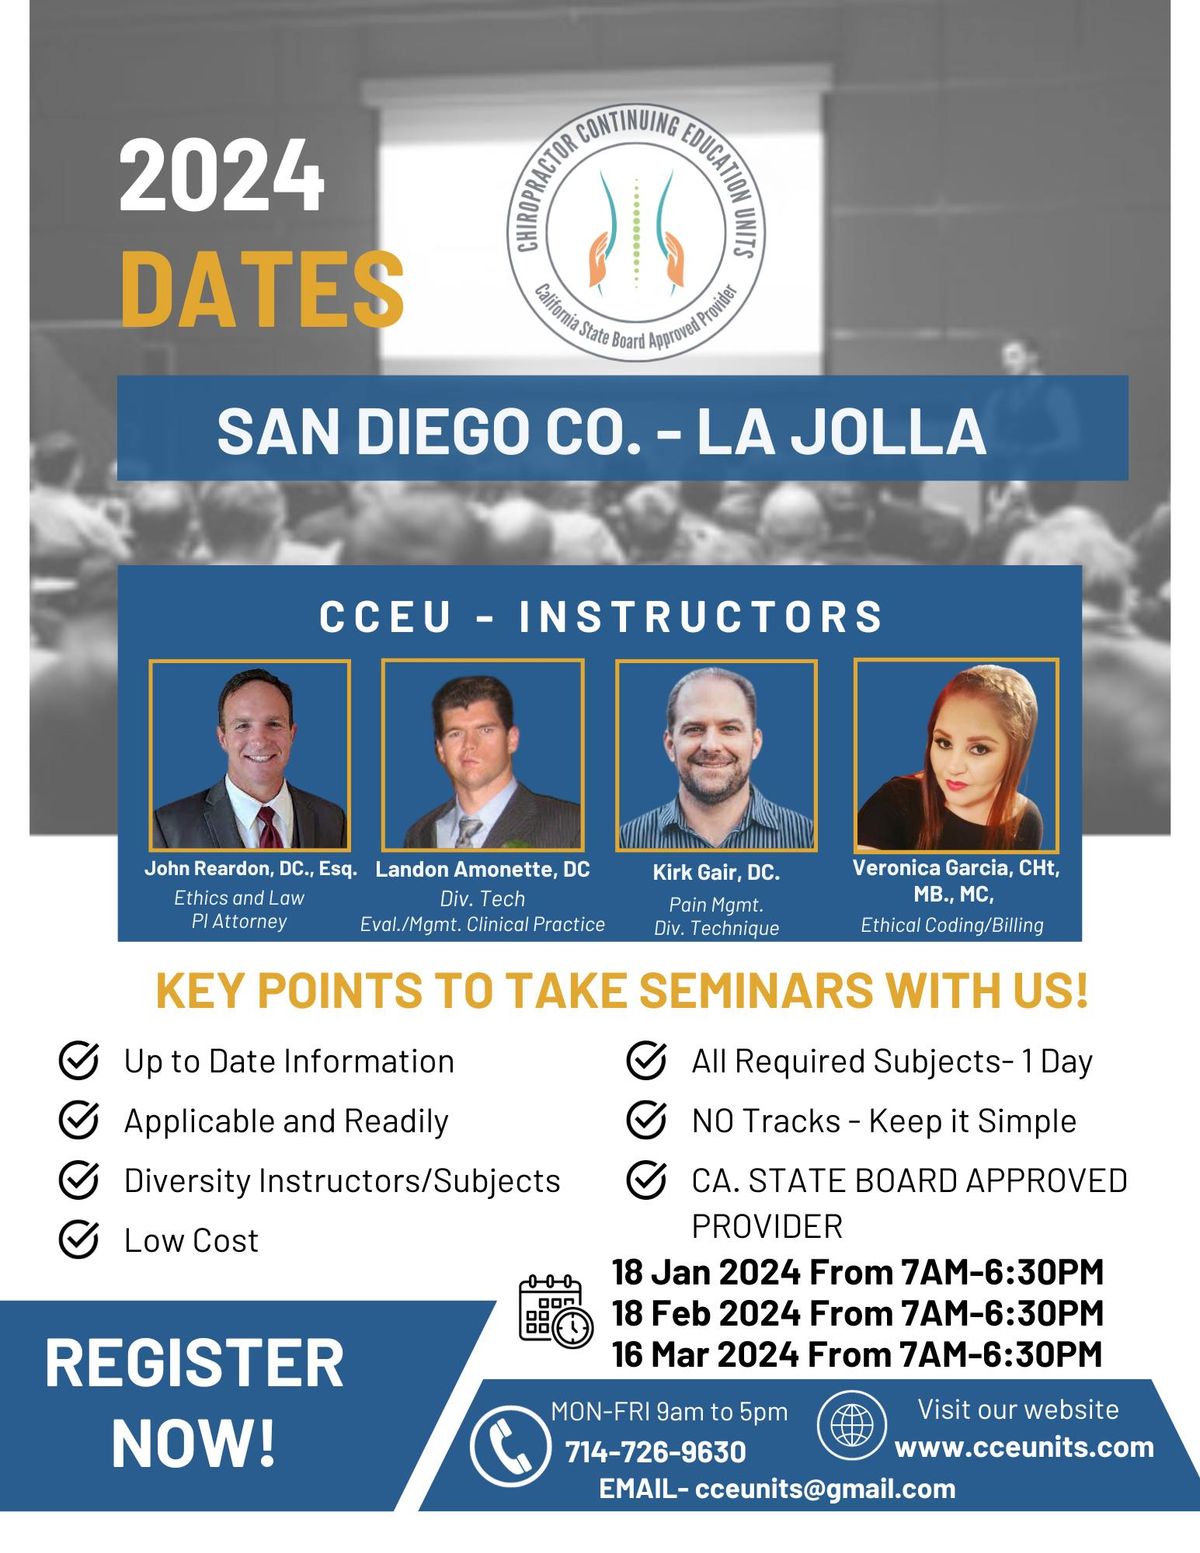 SAN DIEGO COUNTY CA APPROVED CONTINUING EDUCATION SEMINARS